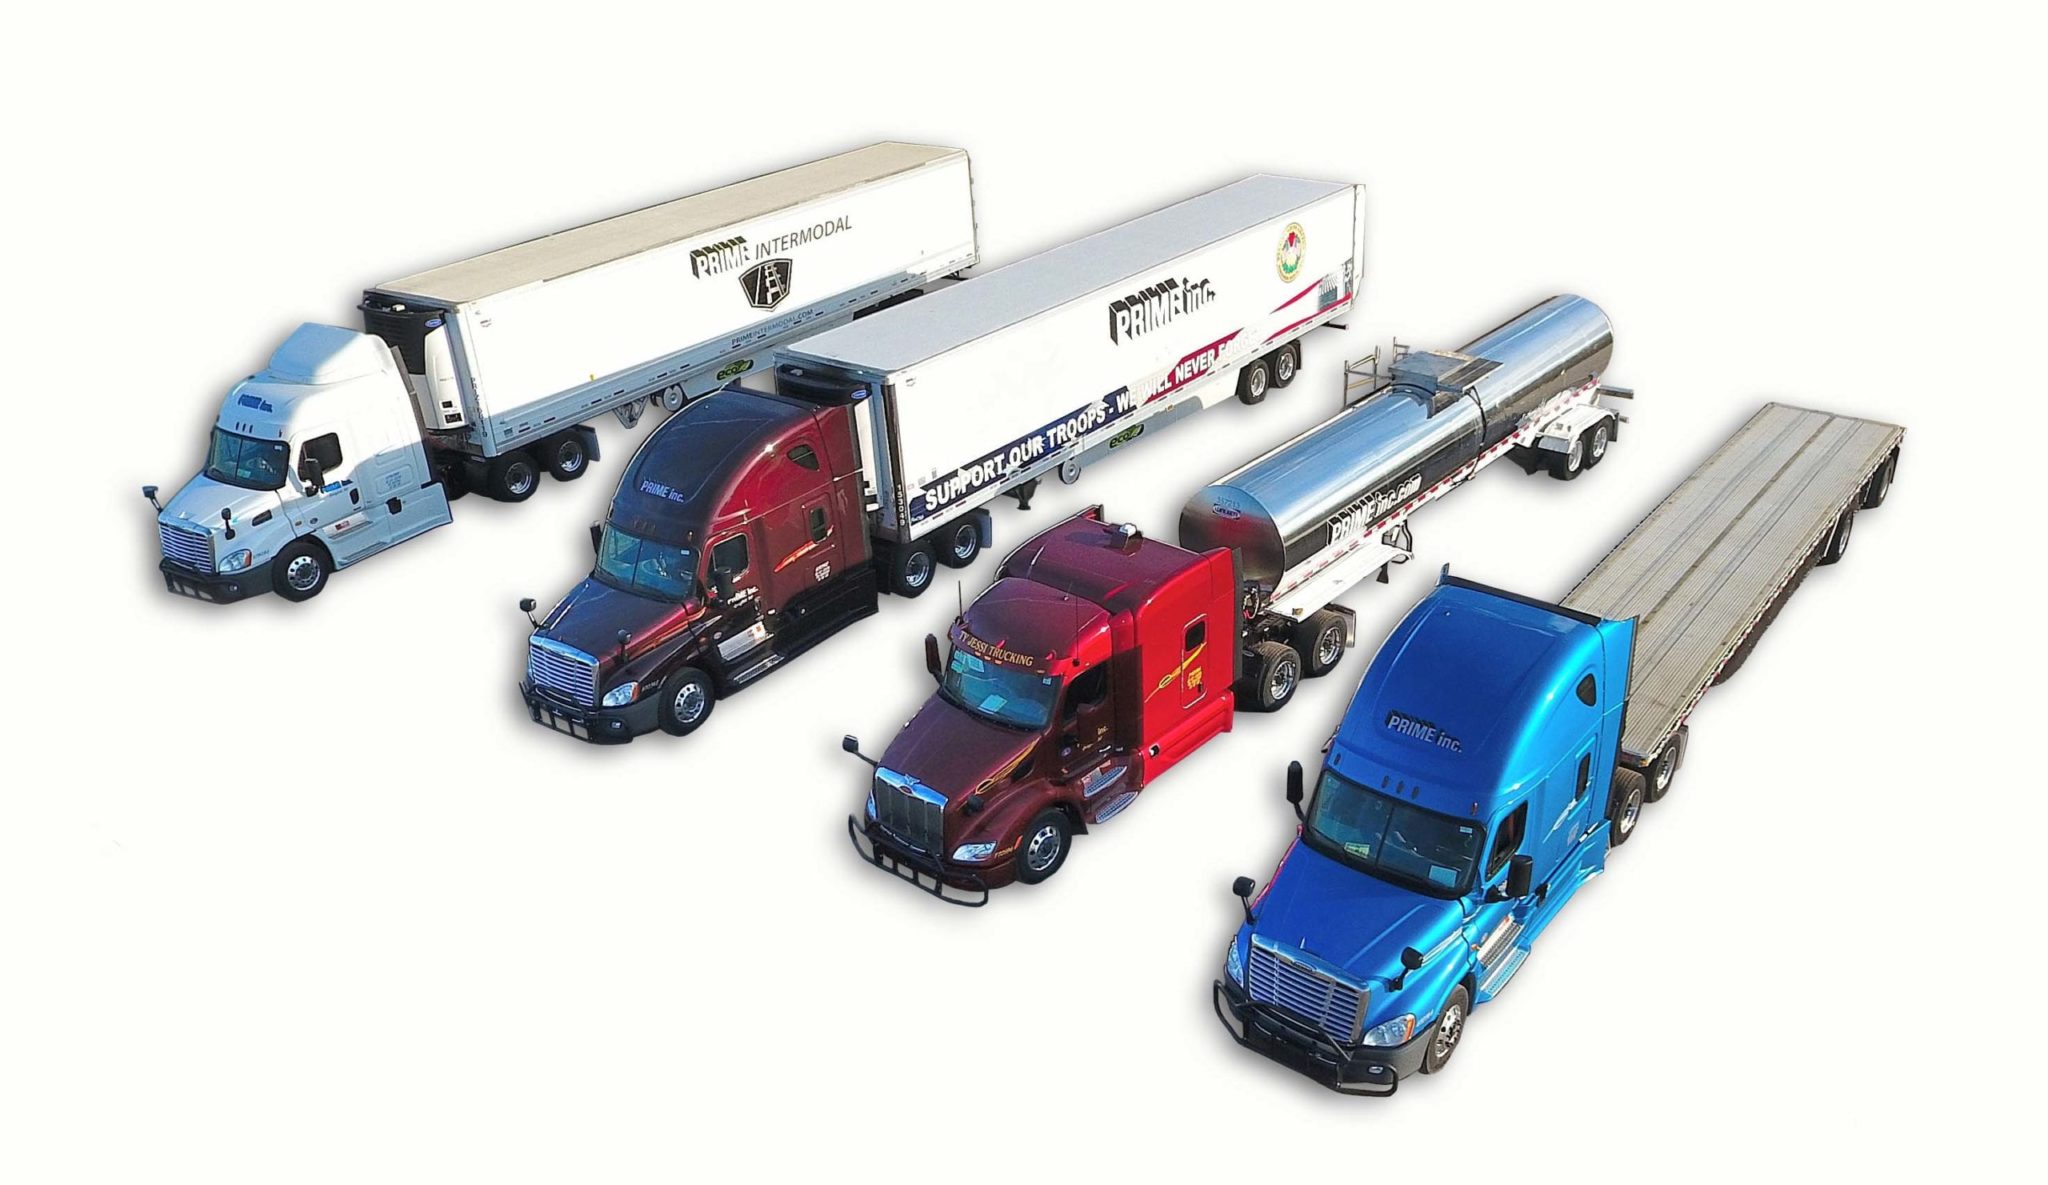 Truck models from Prime's trucking divisions: refrigerated, flatbed, tanker and intermodal.